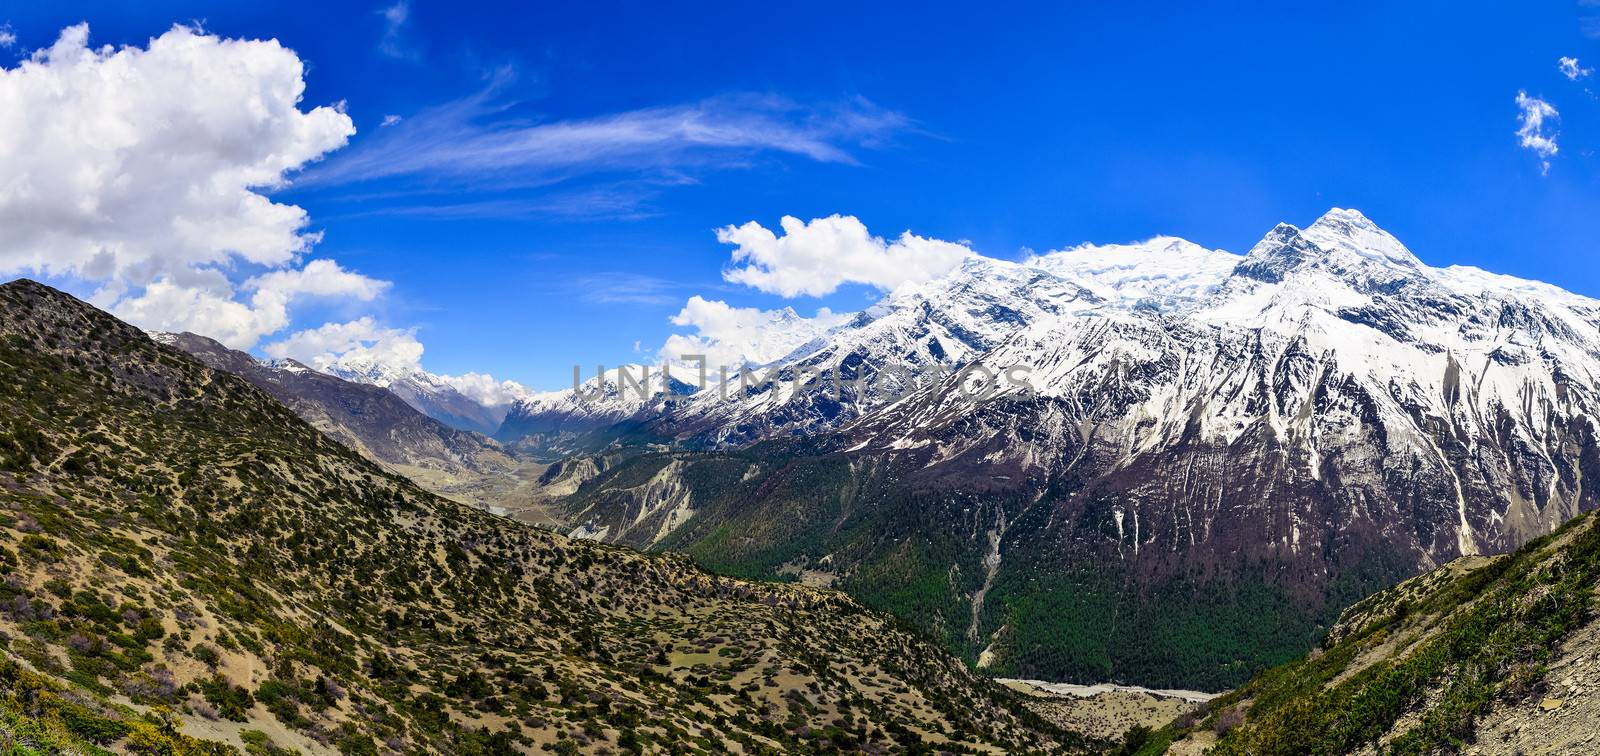 Himalayas mountains valley panorama with white peaks and forest hills, Nepal